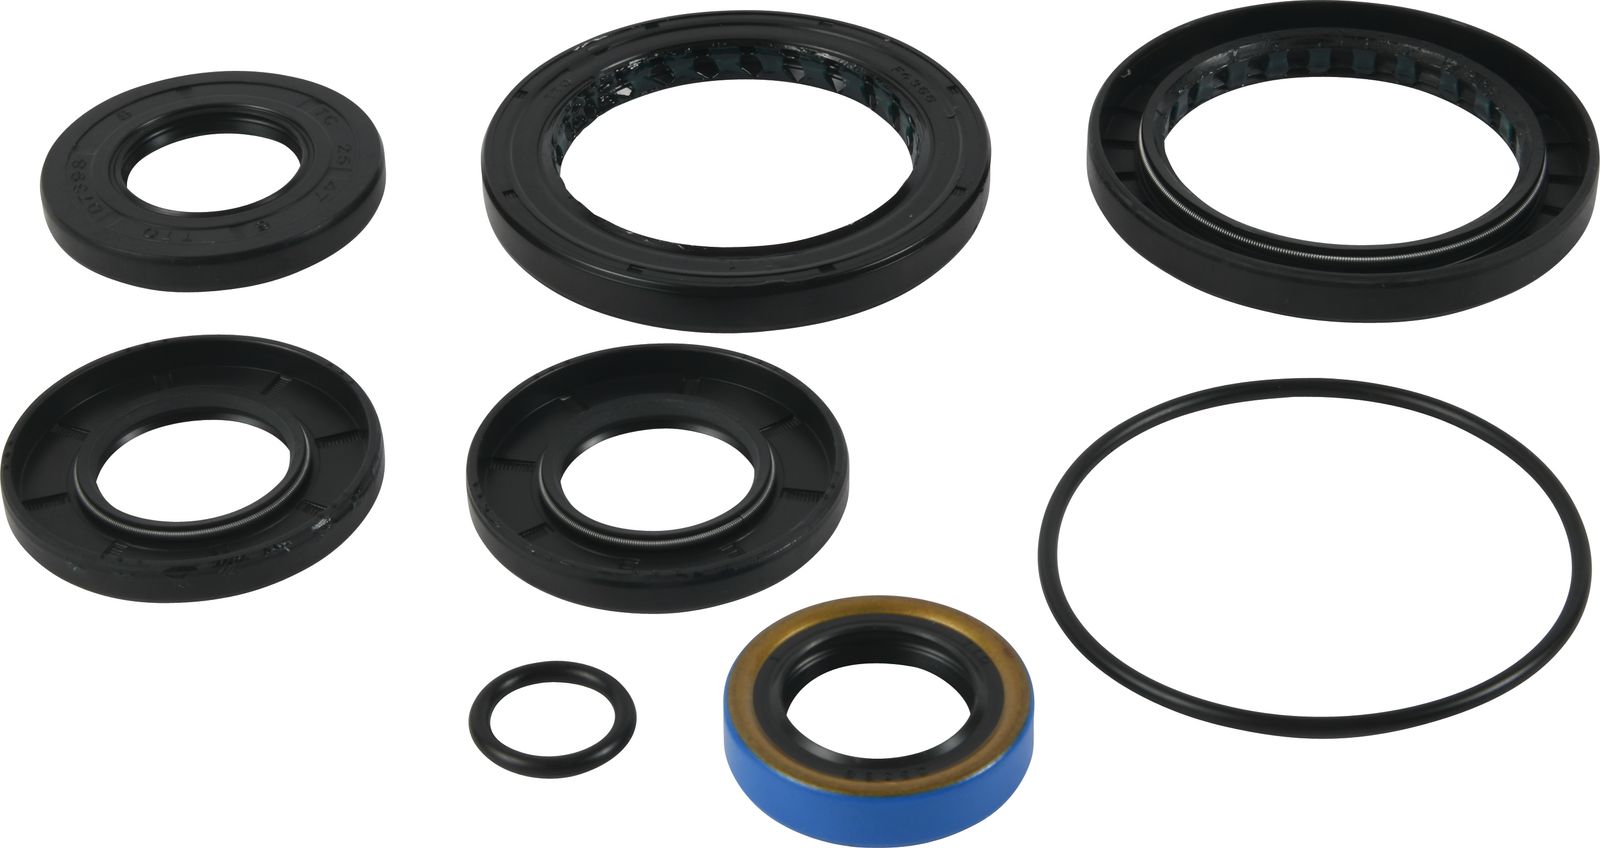 Wrp Diff Seal Kits - WRP252129-5 image